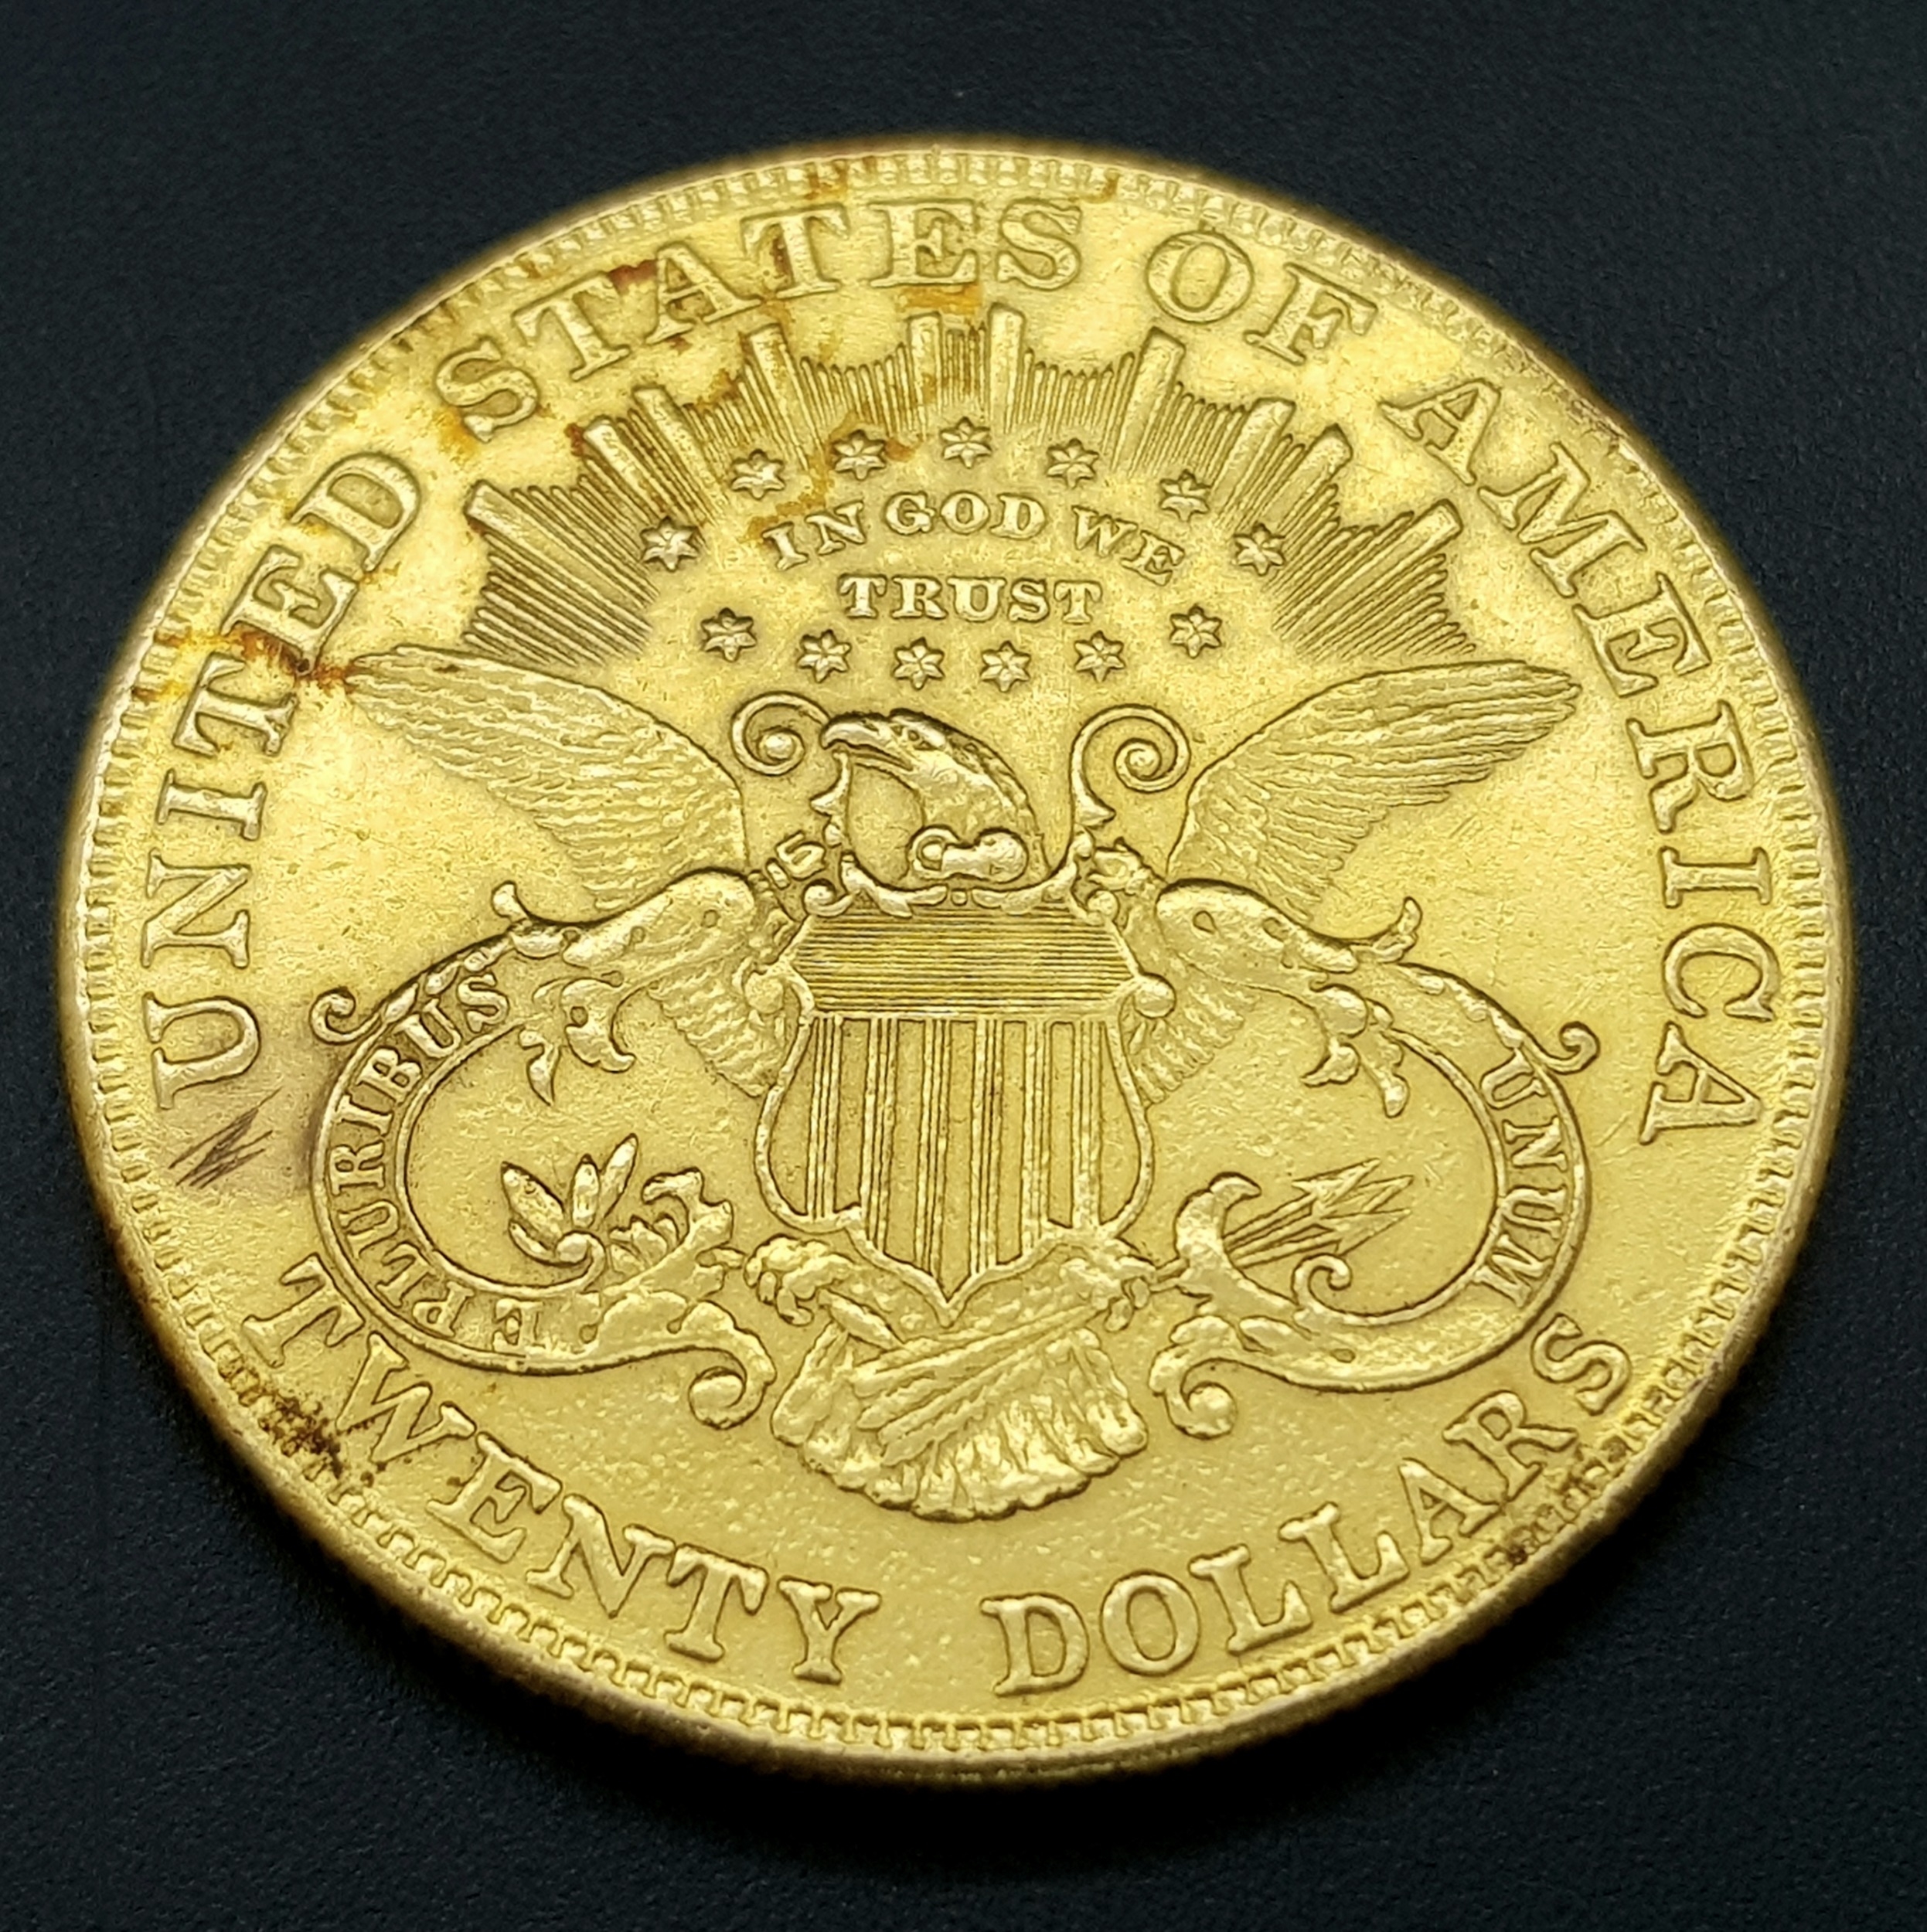 A $20 GOLD LIBERTY COIN DATED 1907 AND WEIGHING 33.43gms THIS COIN IS IN VERY GOOD CONDITION - Image 7 of 8